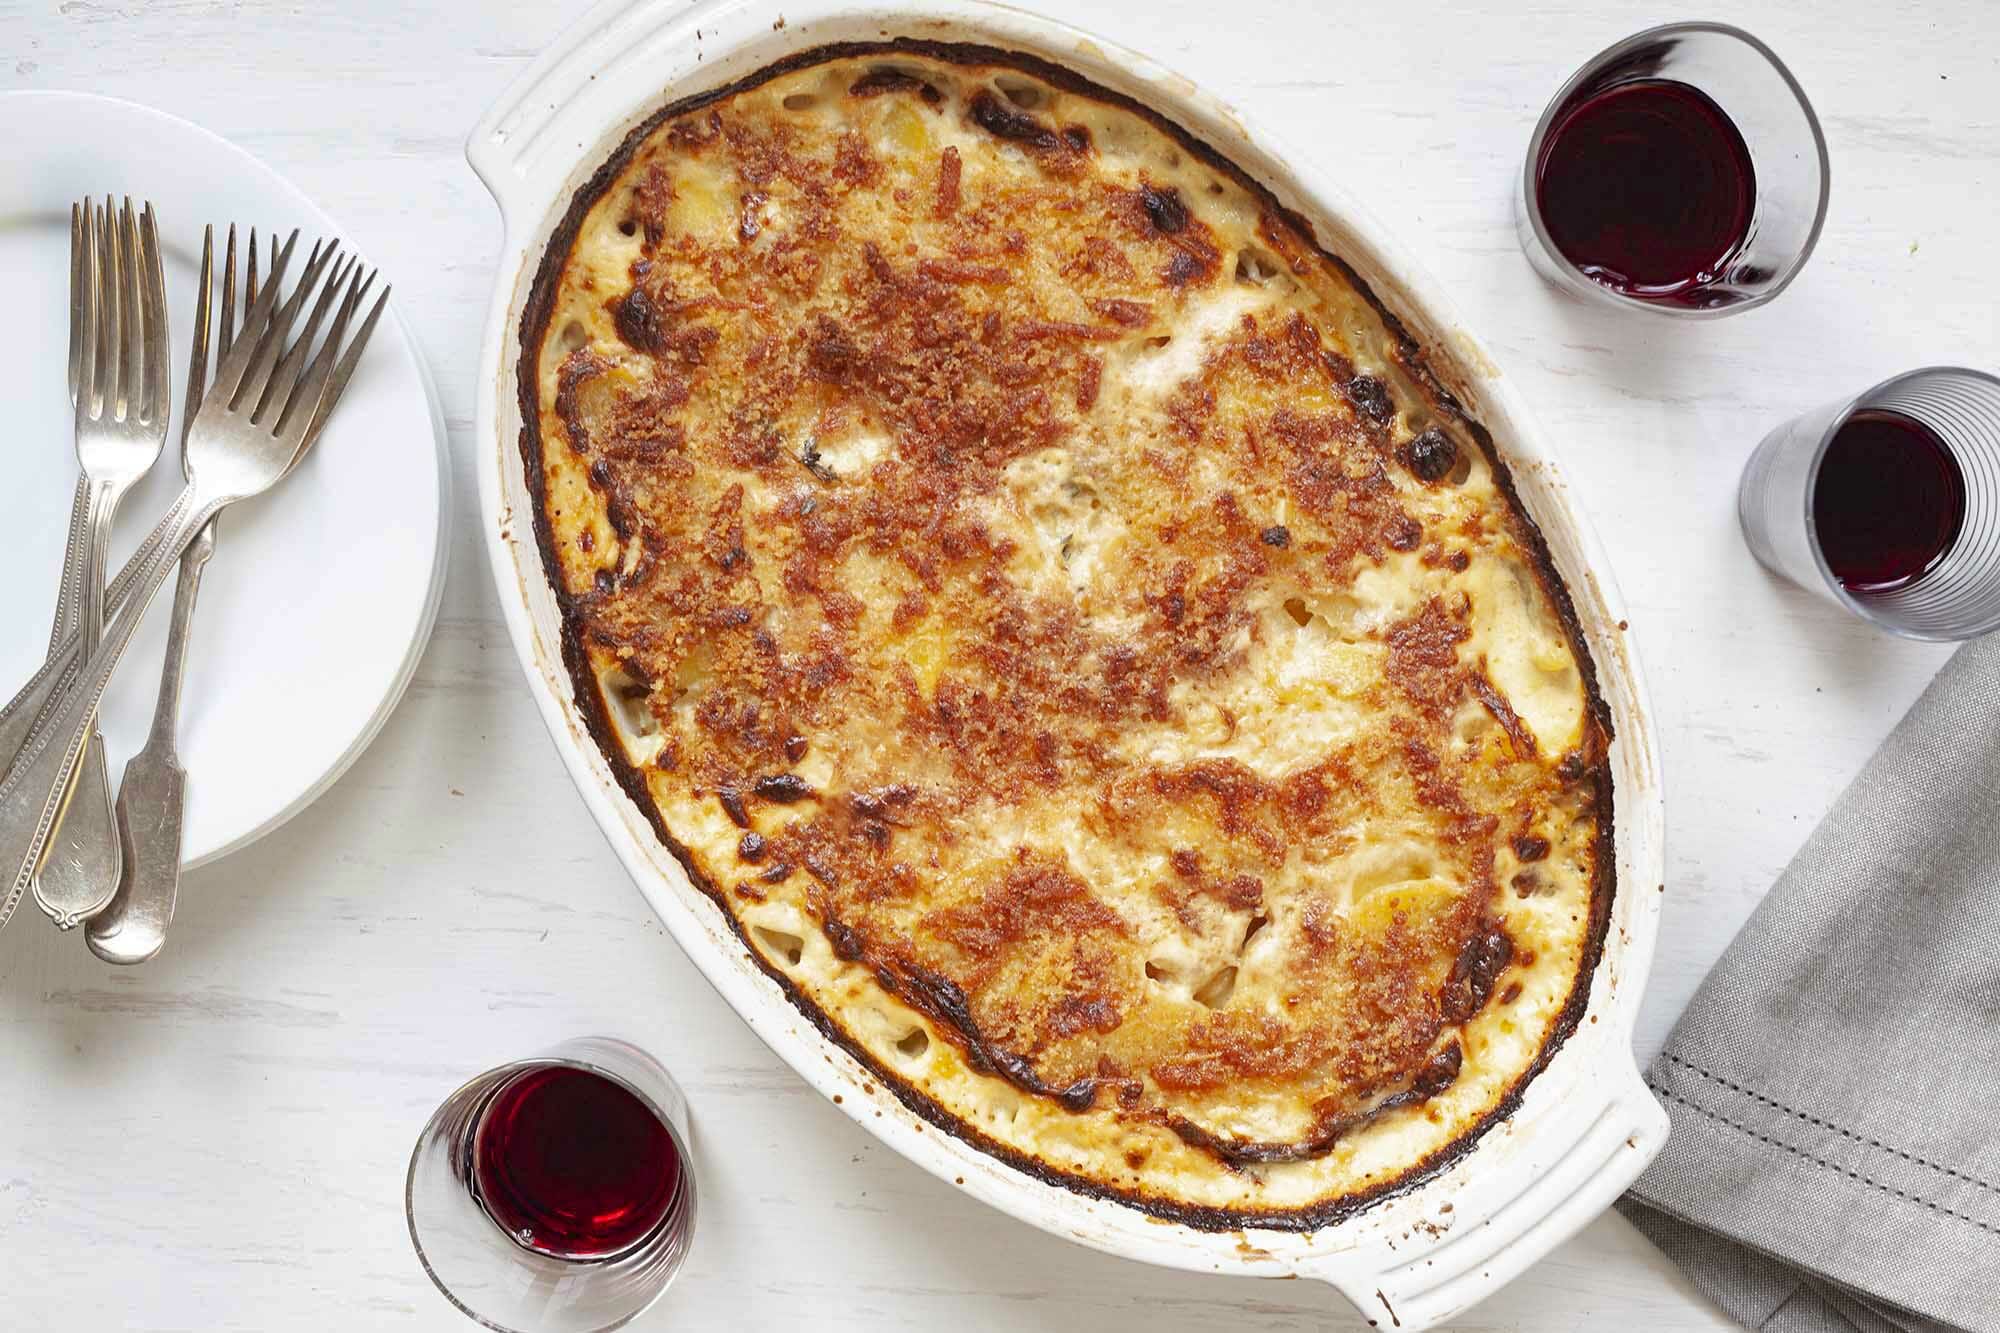 EAsy Au Gratin baked in an oval casserole dish and surrounded by small glasses of red wine, forks and plates.